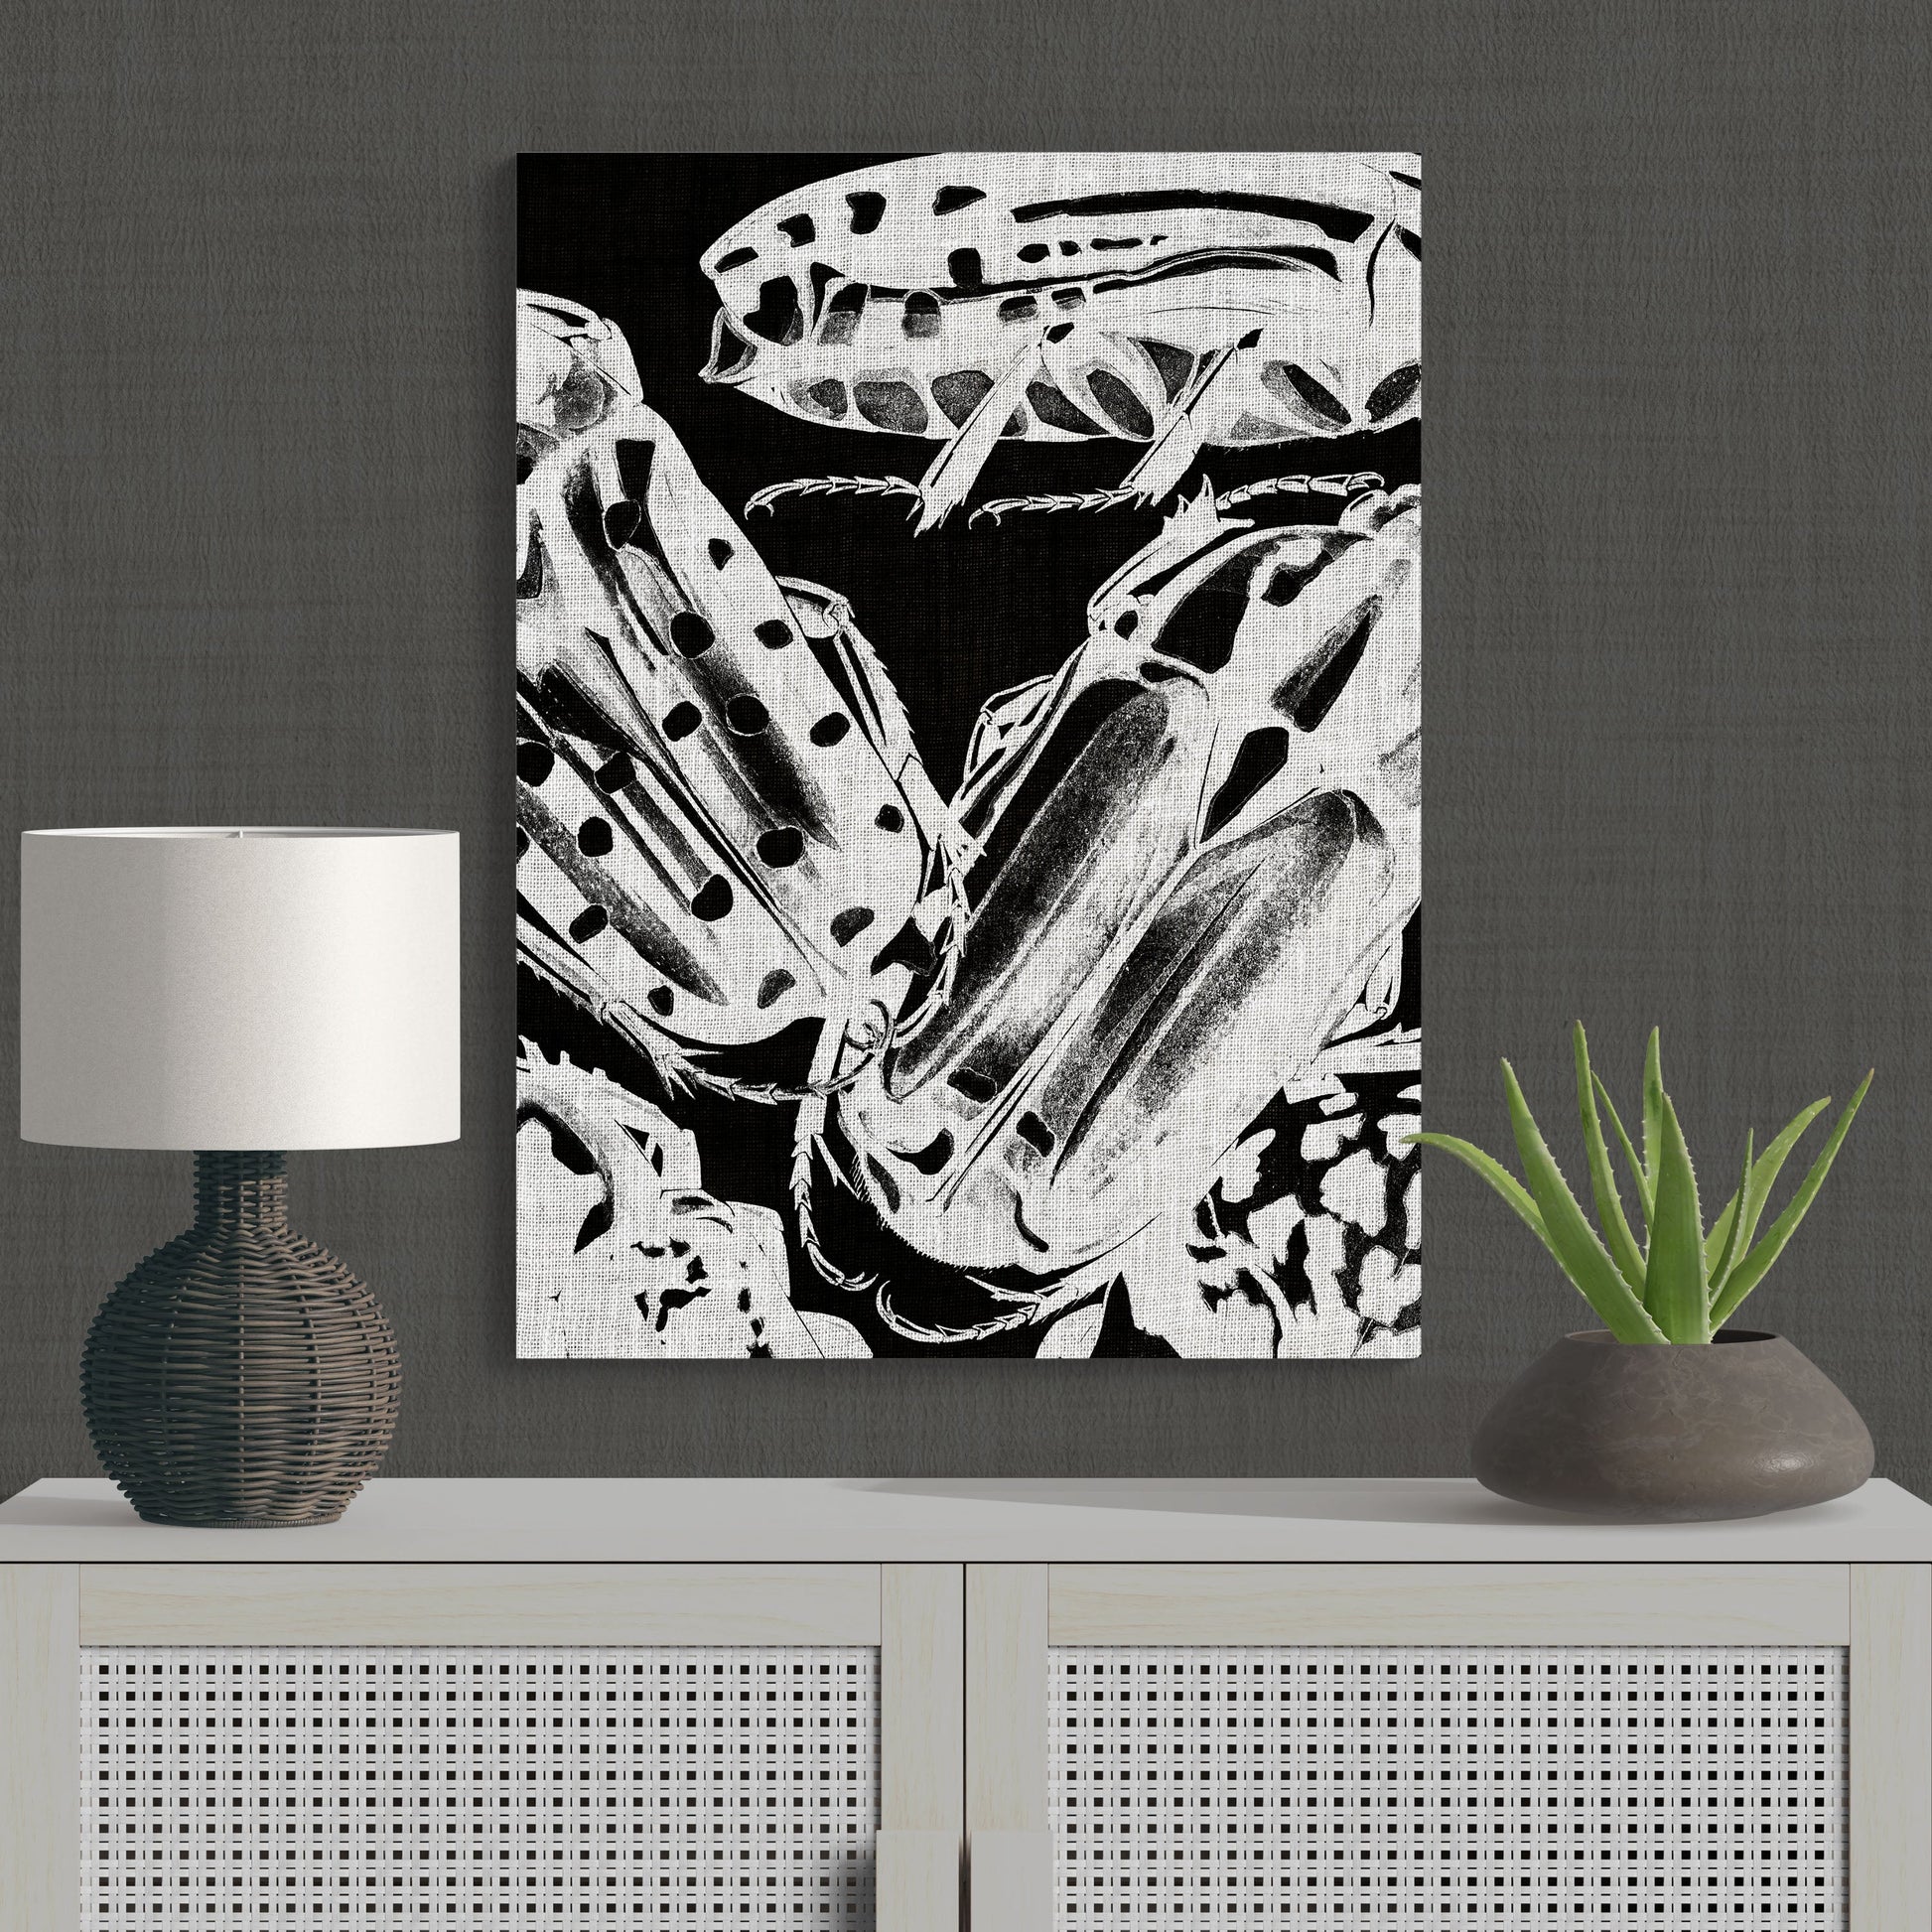 Contemporary Black & White Dung Beetle Modern Nature Art - Retro Reverence